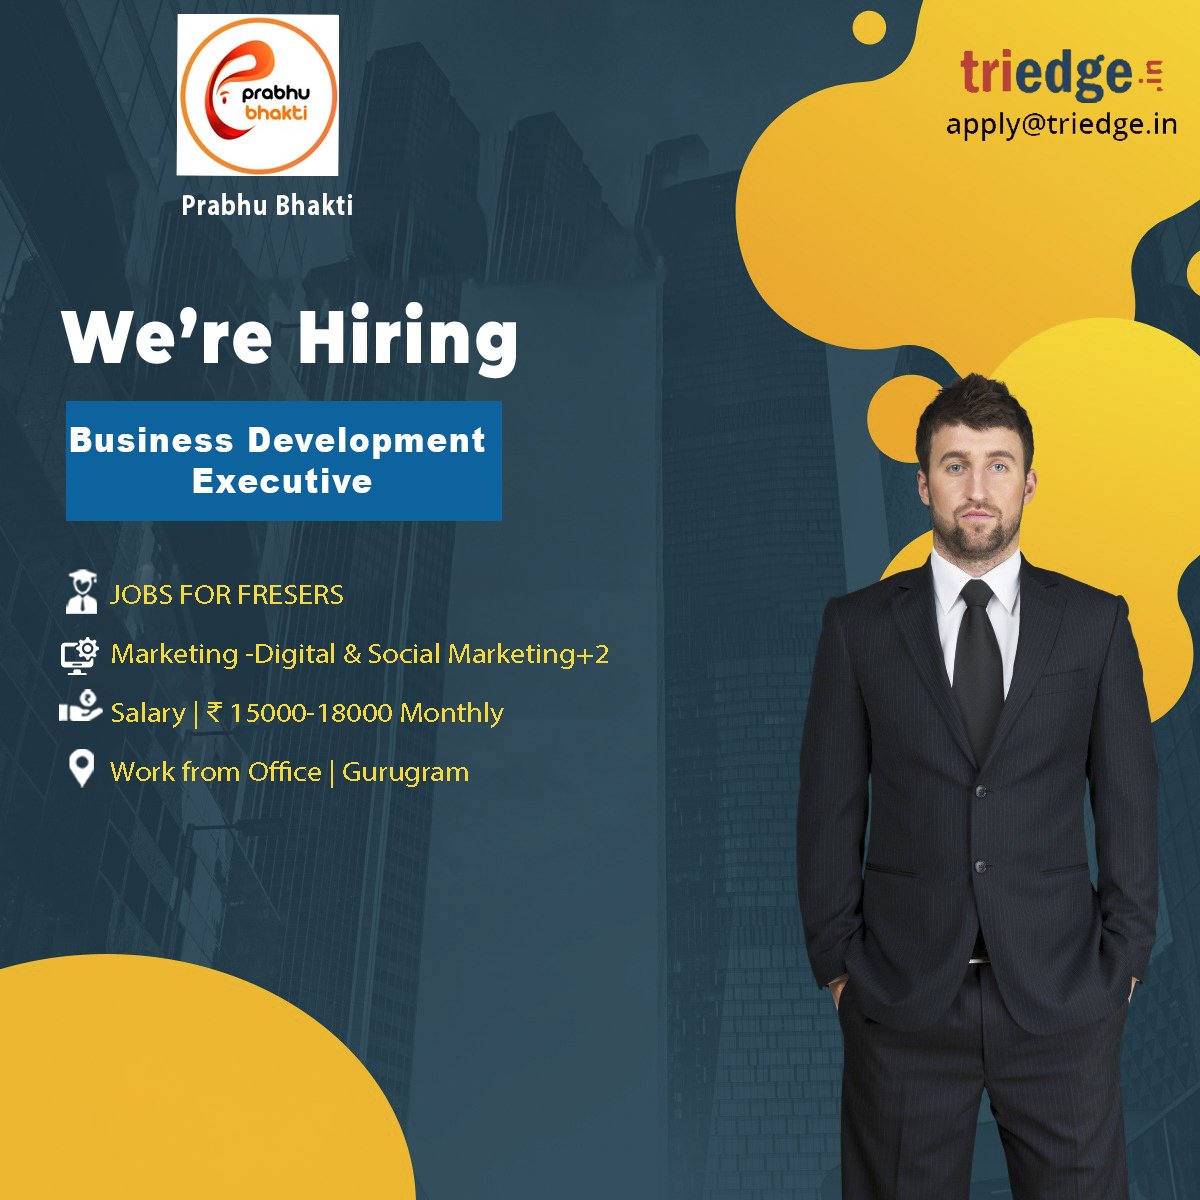 #Jobs #BusinessDevelopmentExecutive 

Prabhu Bhakti  is providing opportunities for the role of Business Development Executive 

. Apply with your resume at apply@triedge.in.